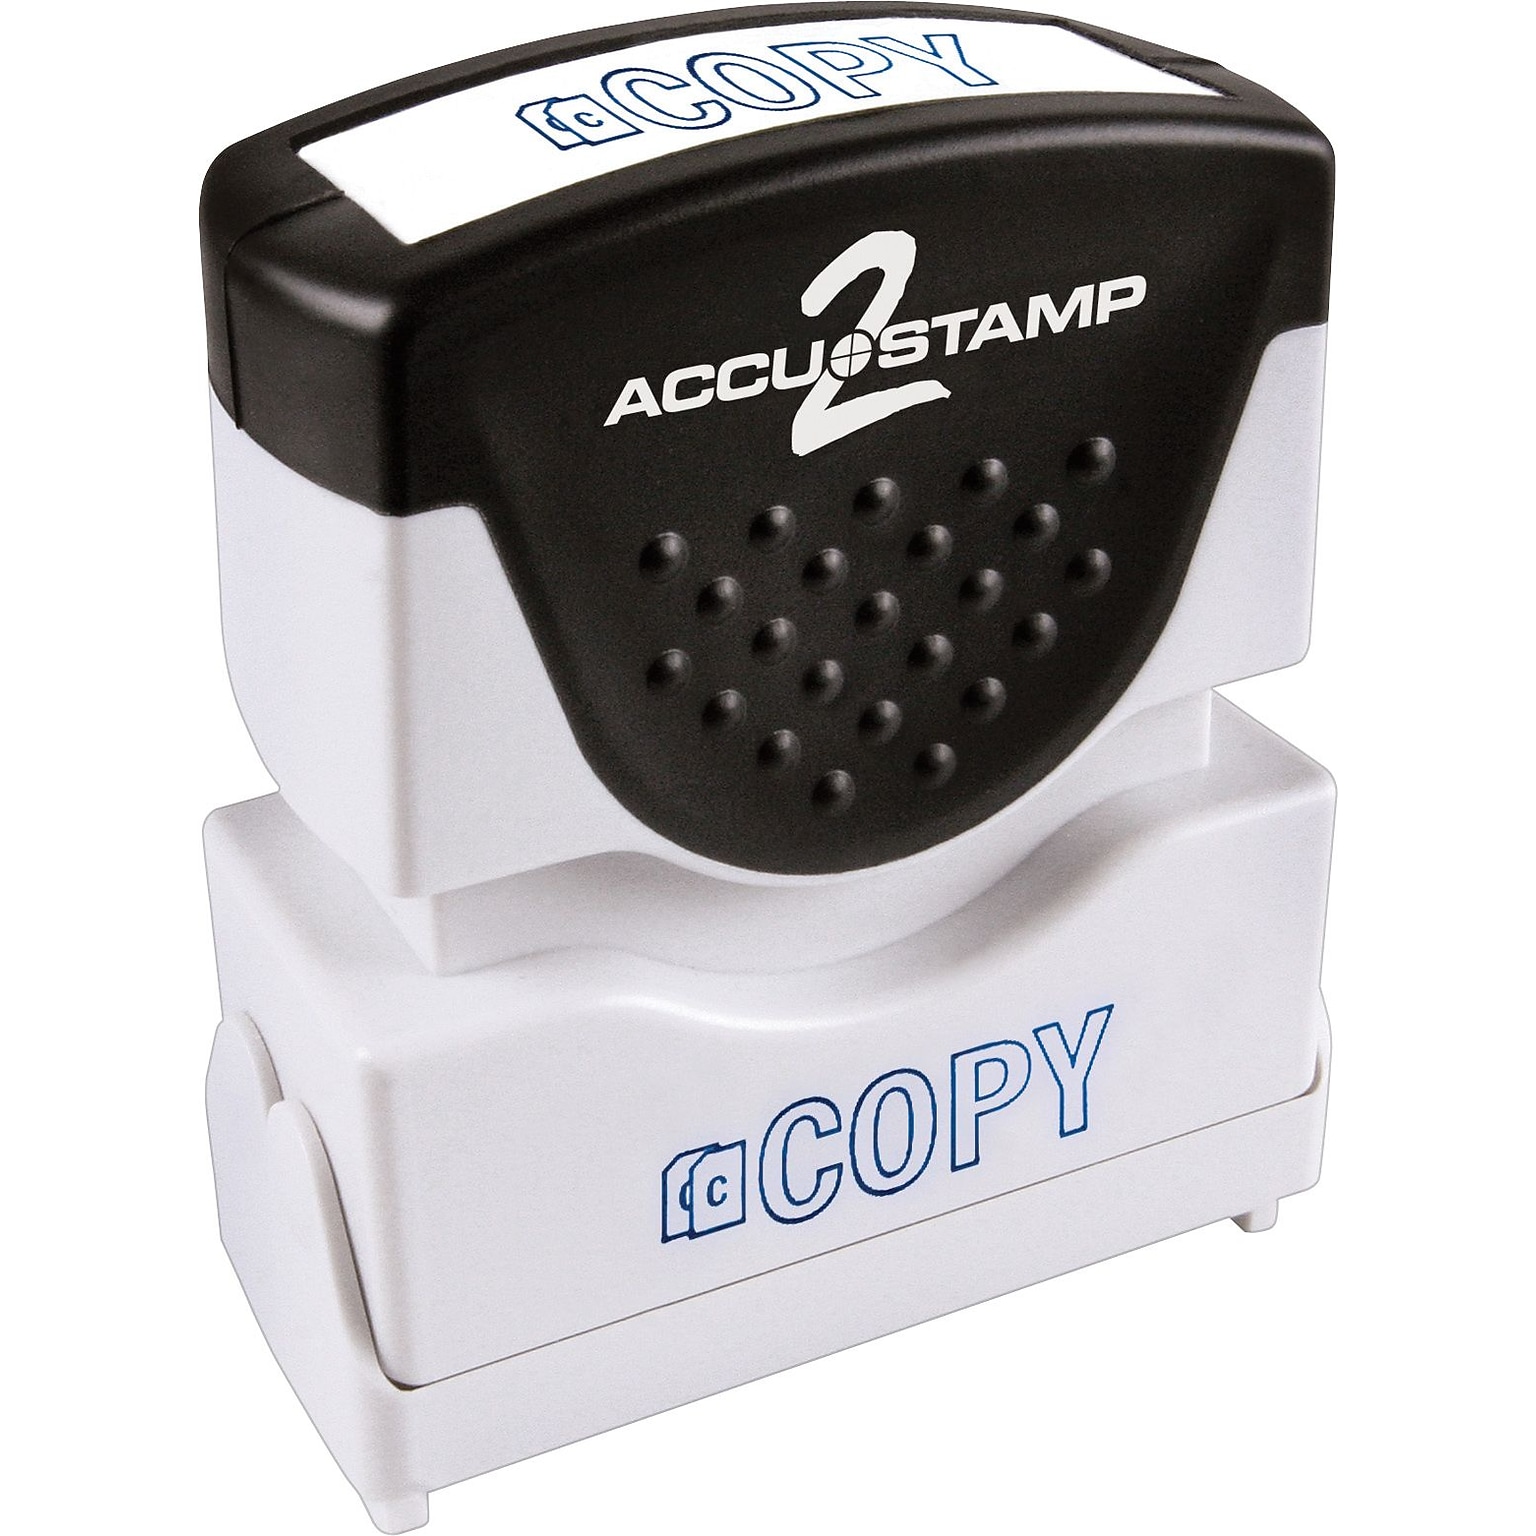 Accu-Stamp2® One-Color Pre-Inked Shutter Message Stamp, COPY, 1/2 x 1-5/8 Impression, Blue Ink (035581)